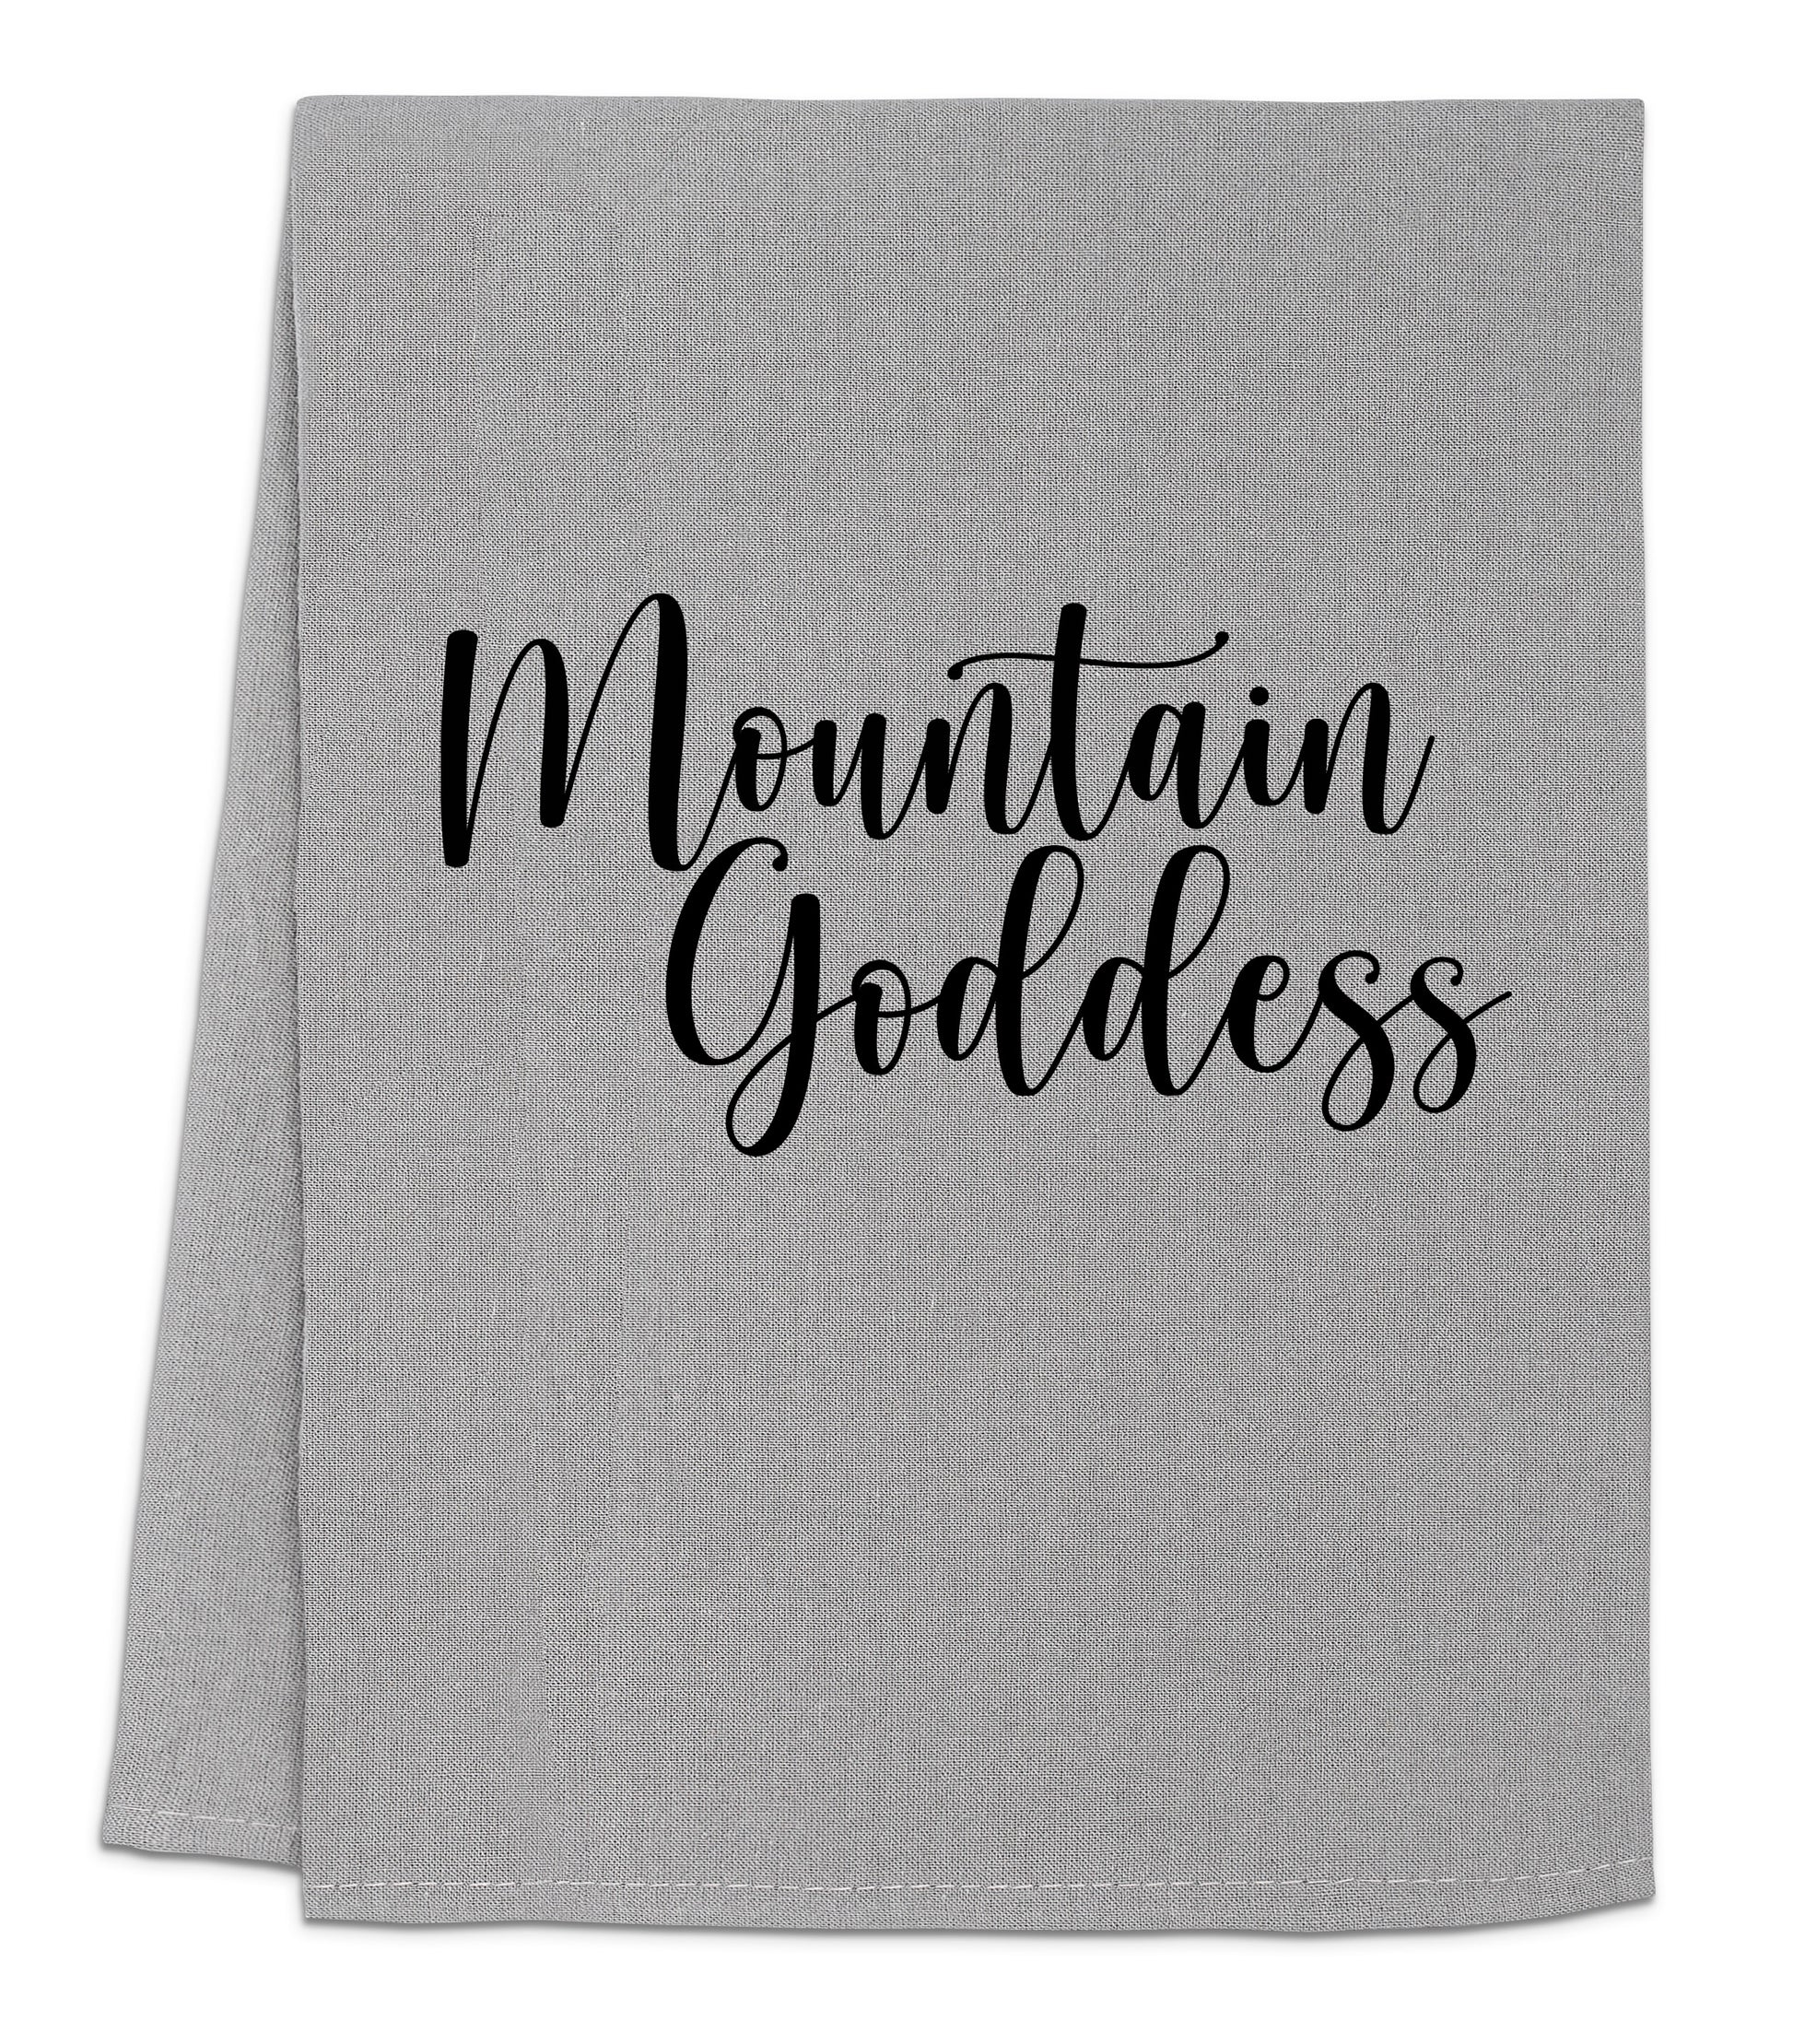 a towel with the words mountain goddess printed on it